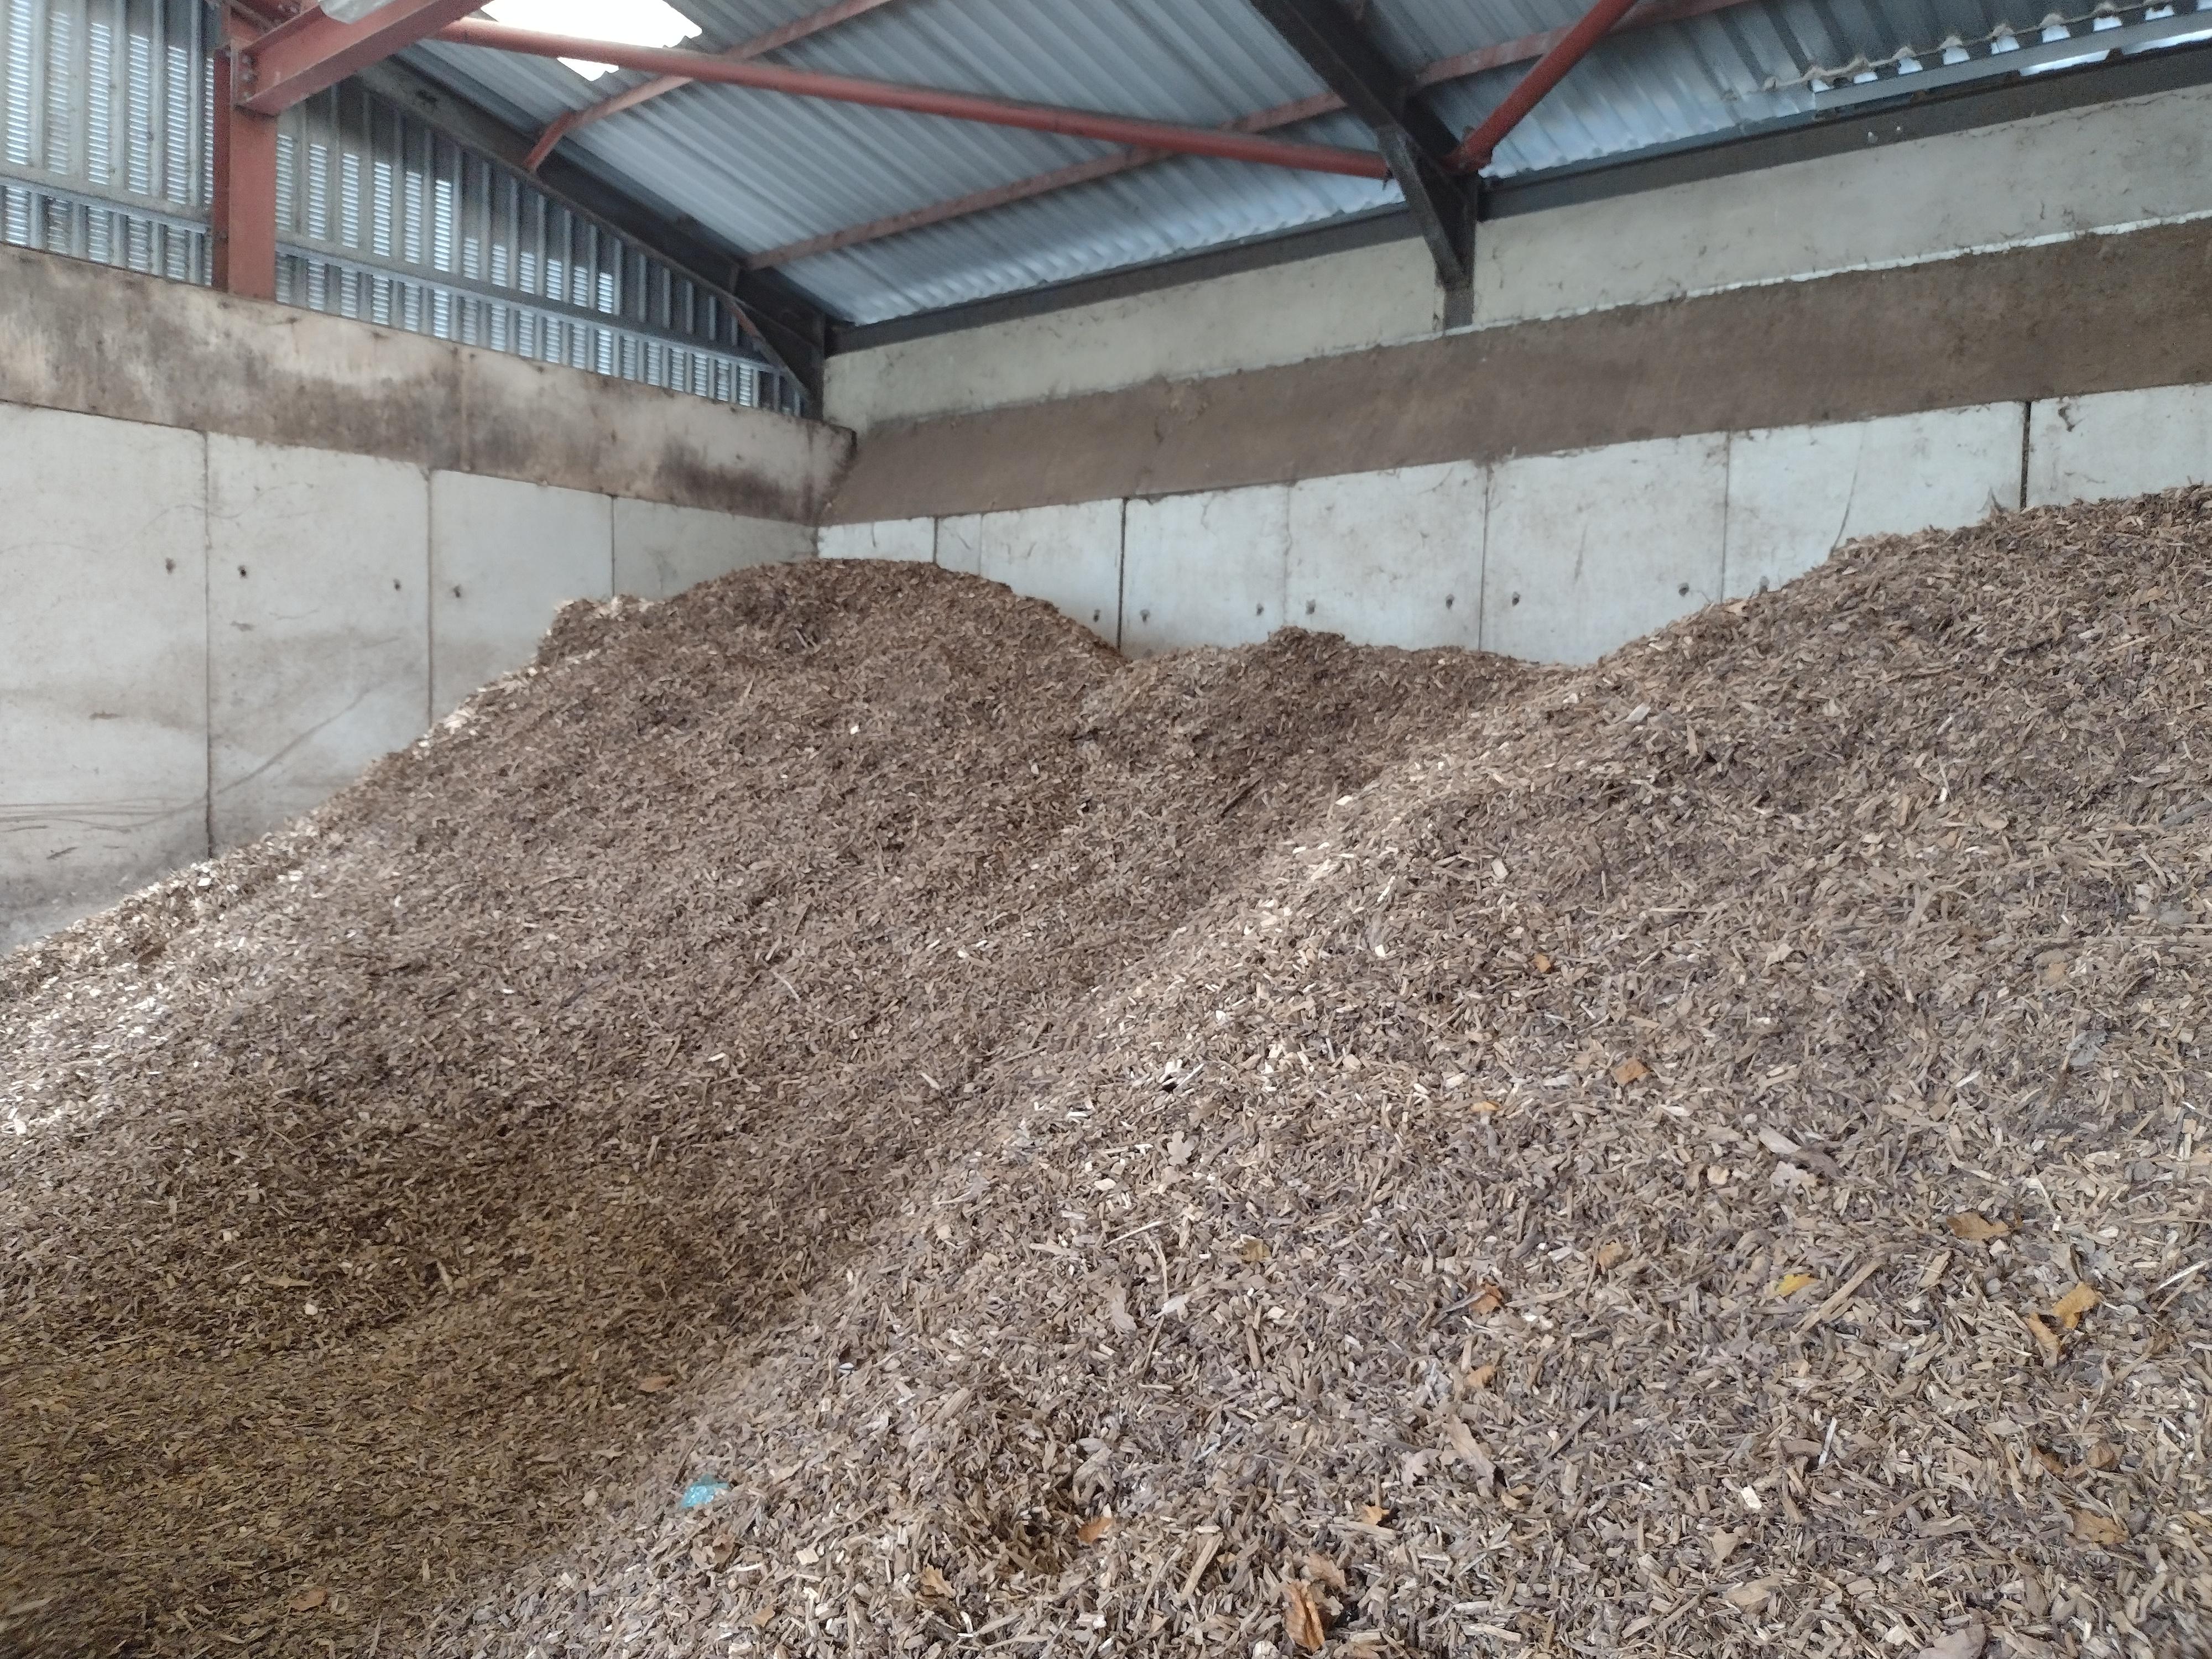 2 large piles of wood chips